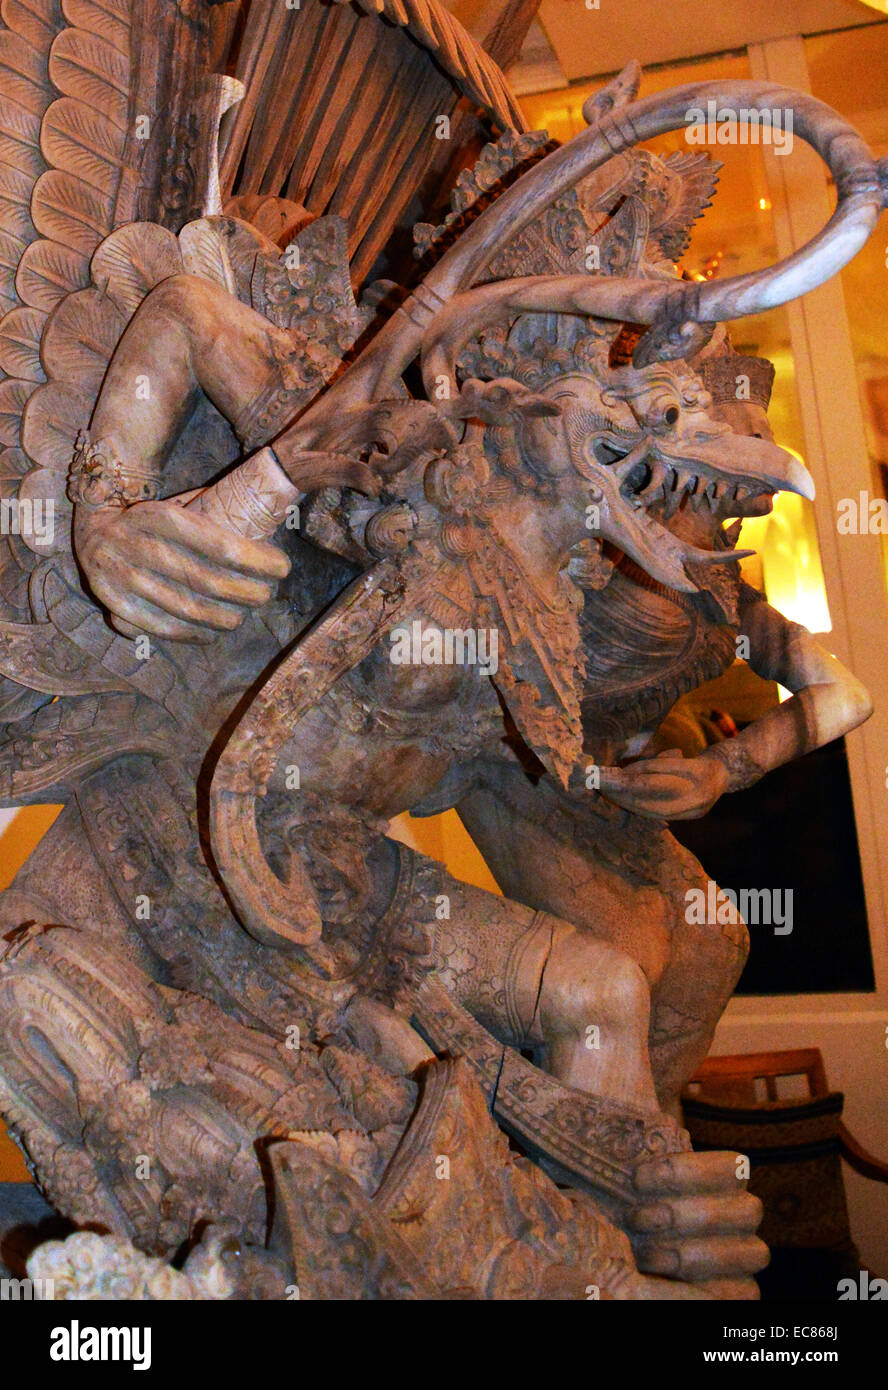 detail of a wooden carved statue of an Indonesian garuda. The Garuda is a large mythical bird; bird-like creature; or humanoid bird that appears in both Hindu and Buddhist mythology. Garuda is the mount (vahana) of the Lord Vishnu. Garuda is the Hindu name for the constellation Aquila. The Brahminy kite and Phoenix are considered to be the contemporary representations of Garuda Stock Photo